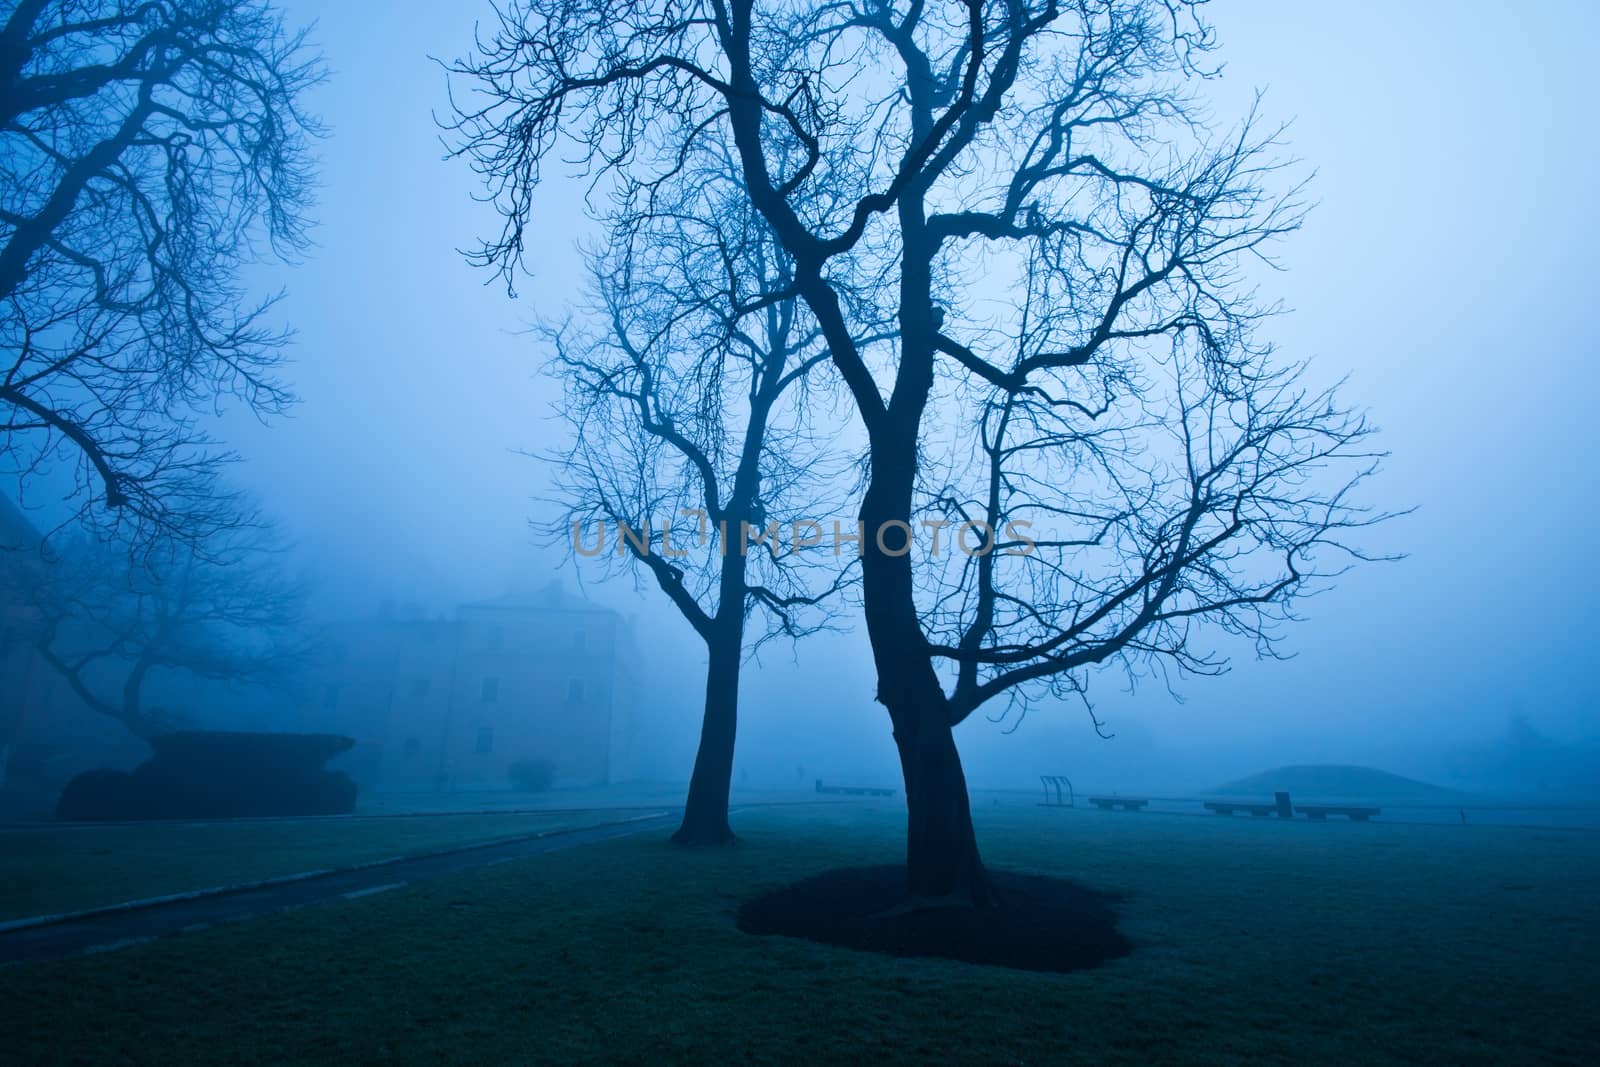 Fog in the morning in the city park. by satariel